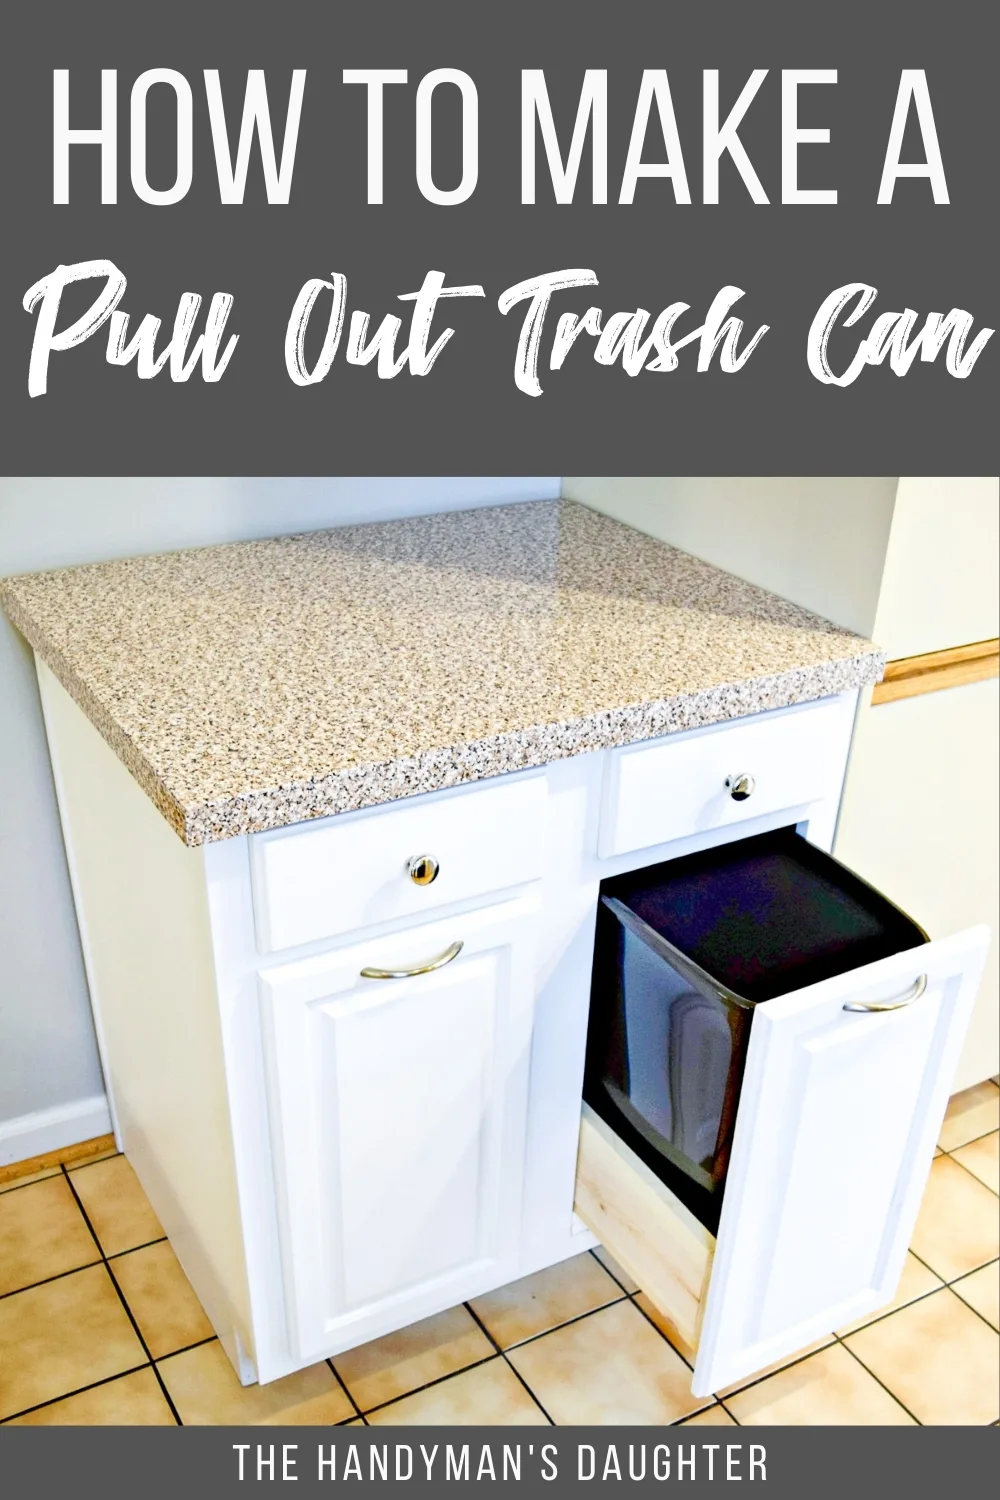 Pull Out Trash Can Drawer Hides Garbage in your Kitchen - Dimensions In Wood